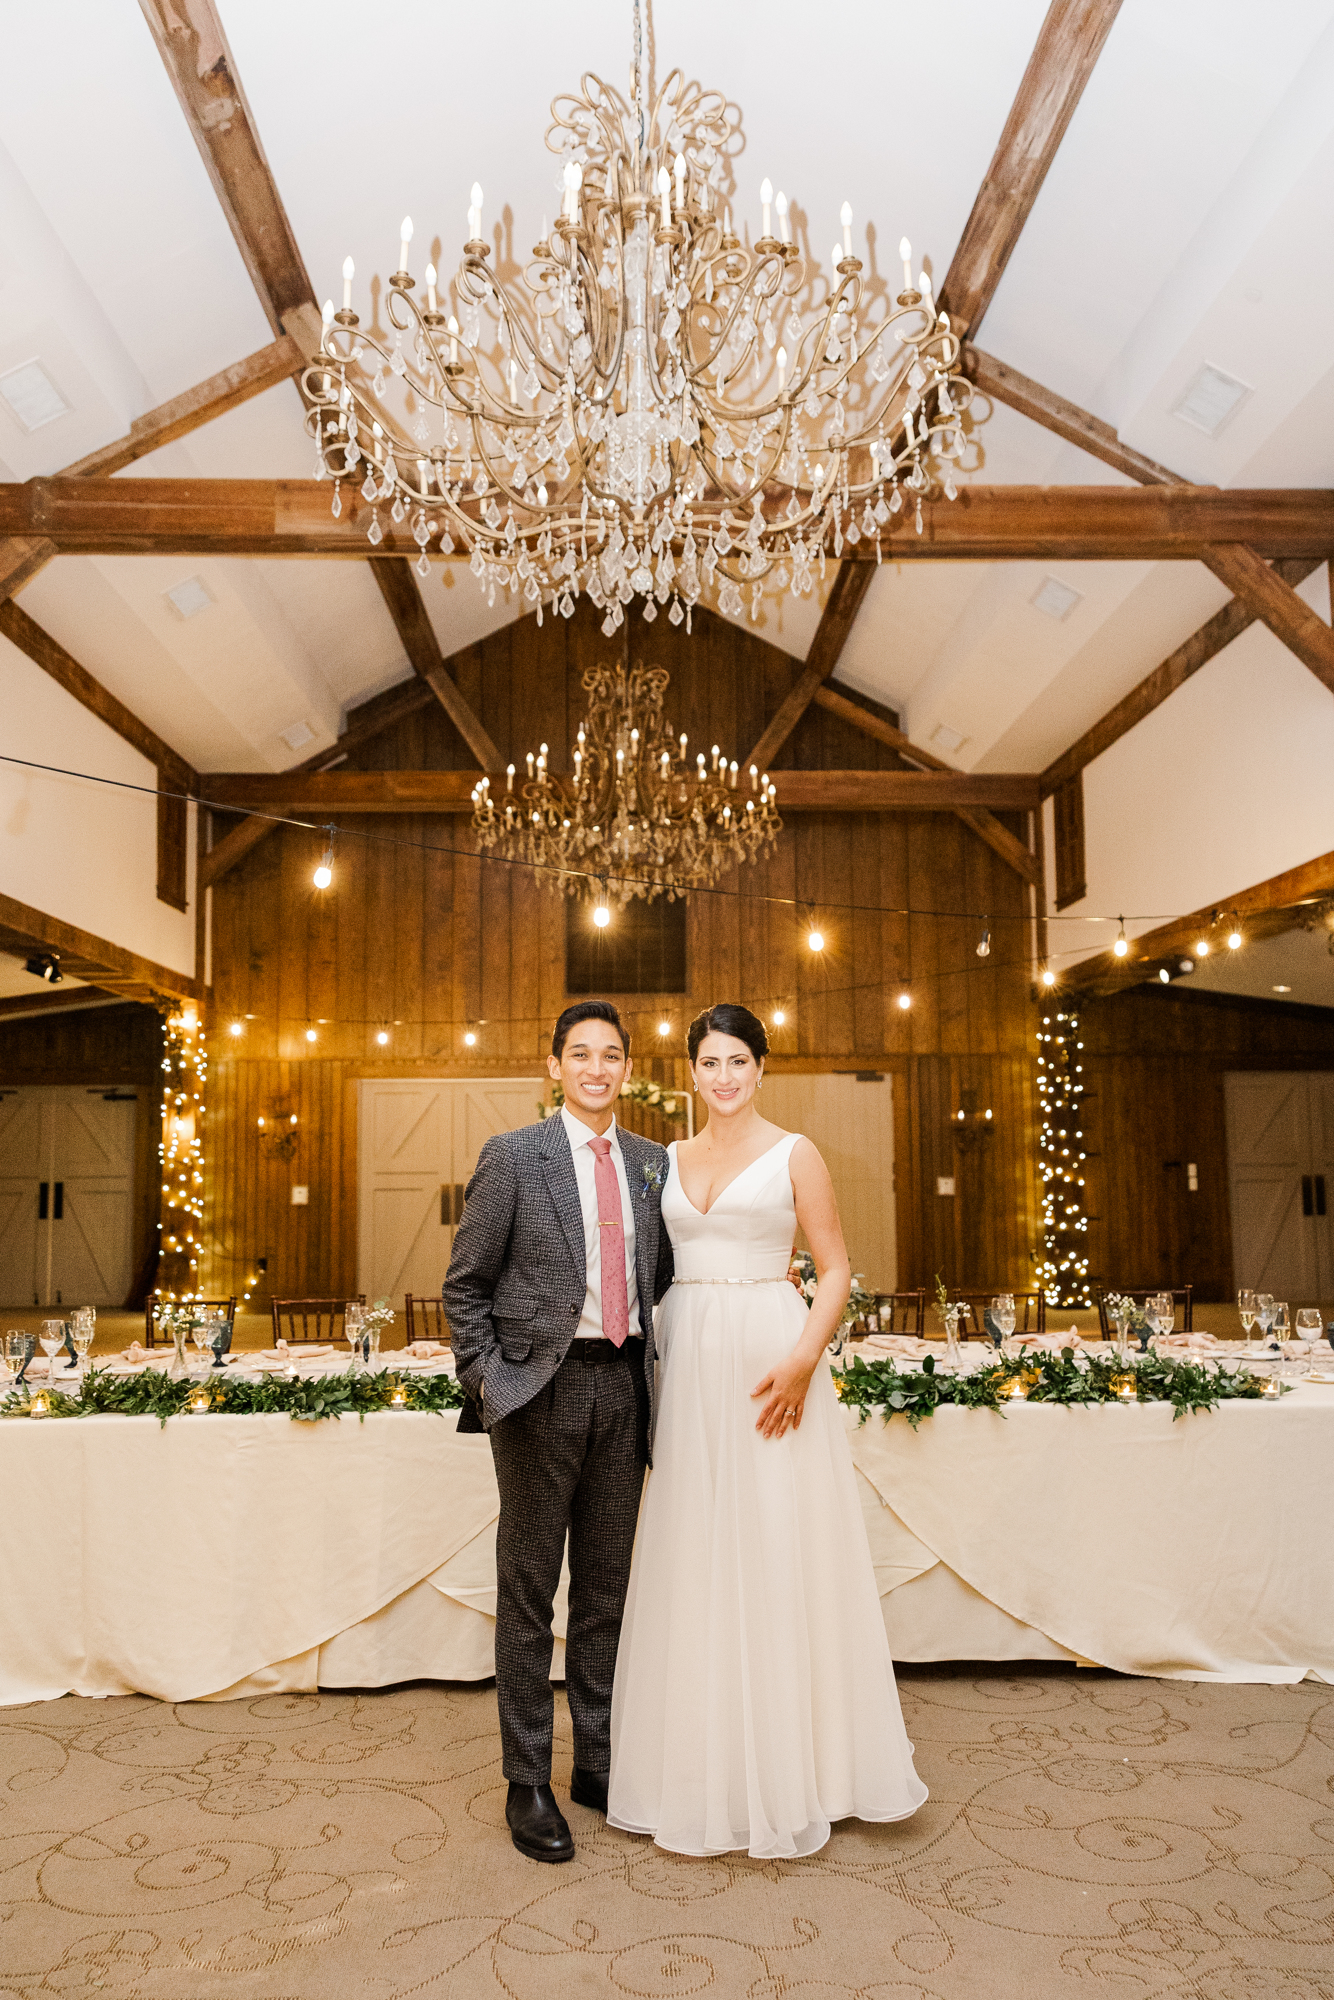 Picture Perfect Normandy Farm Wedding Photos in Wintery Blue Bell, PA